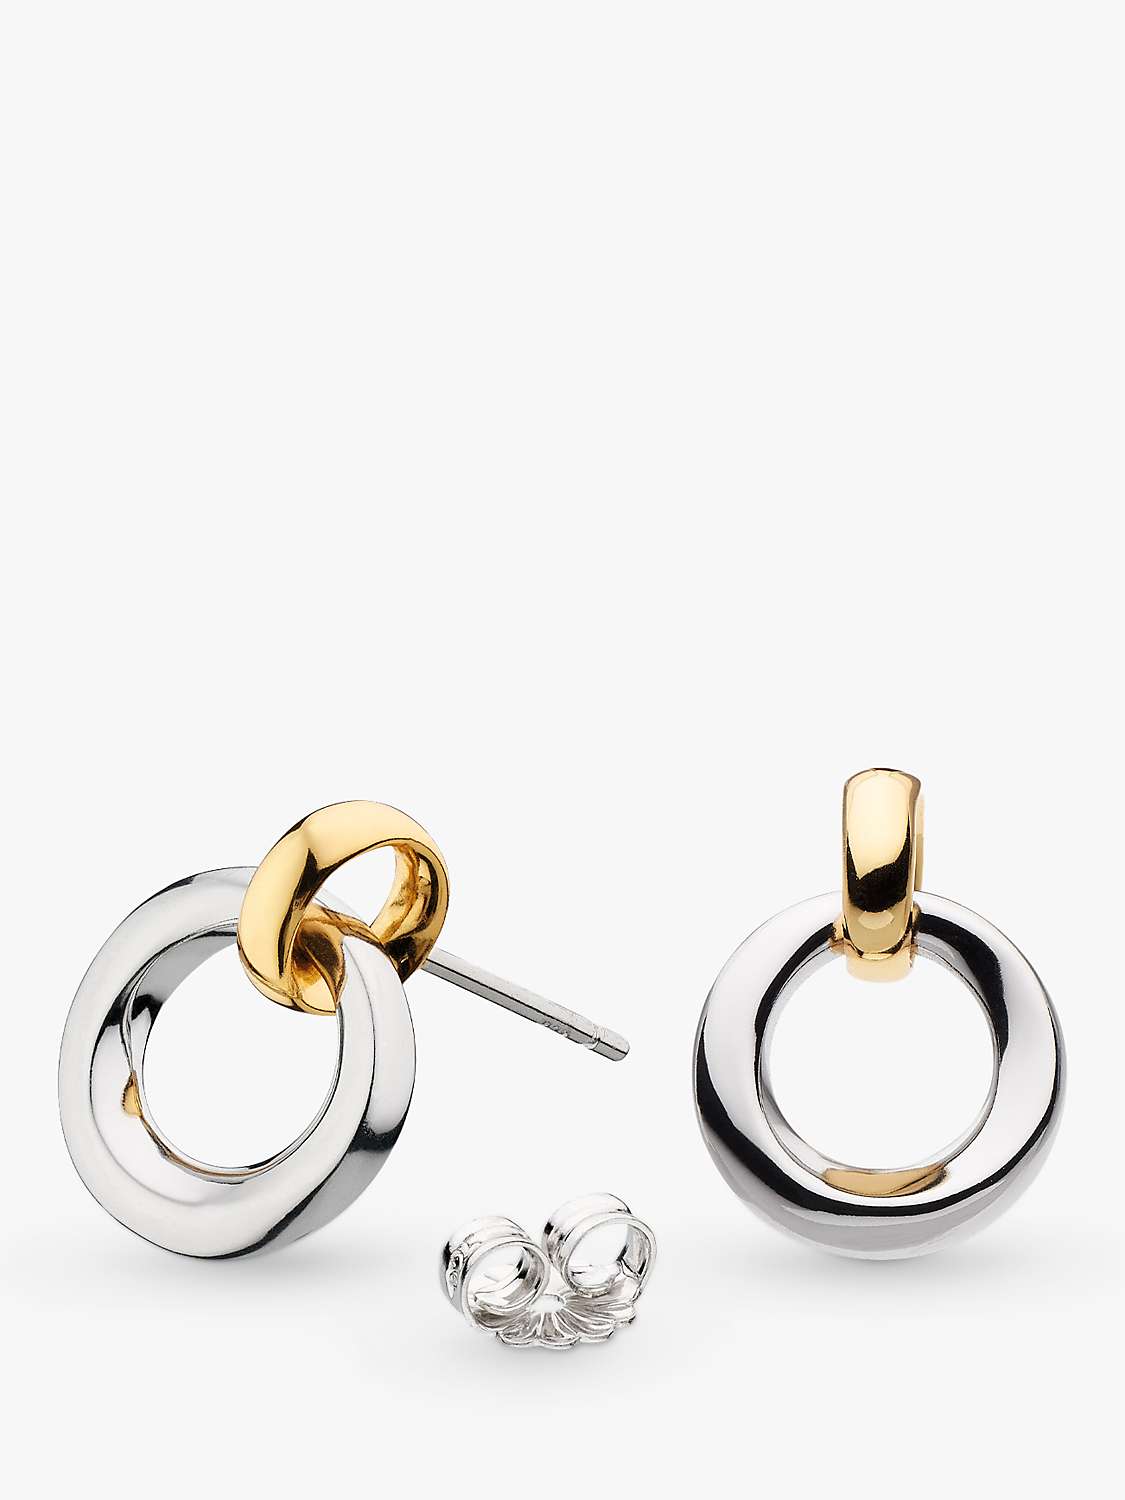 Buy Kit Heath Bevel Cirque Link Stud Drop Earrings, Yellow Gold/Silver Online at johnlewis.com